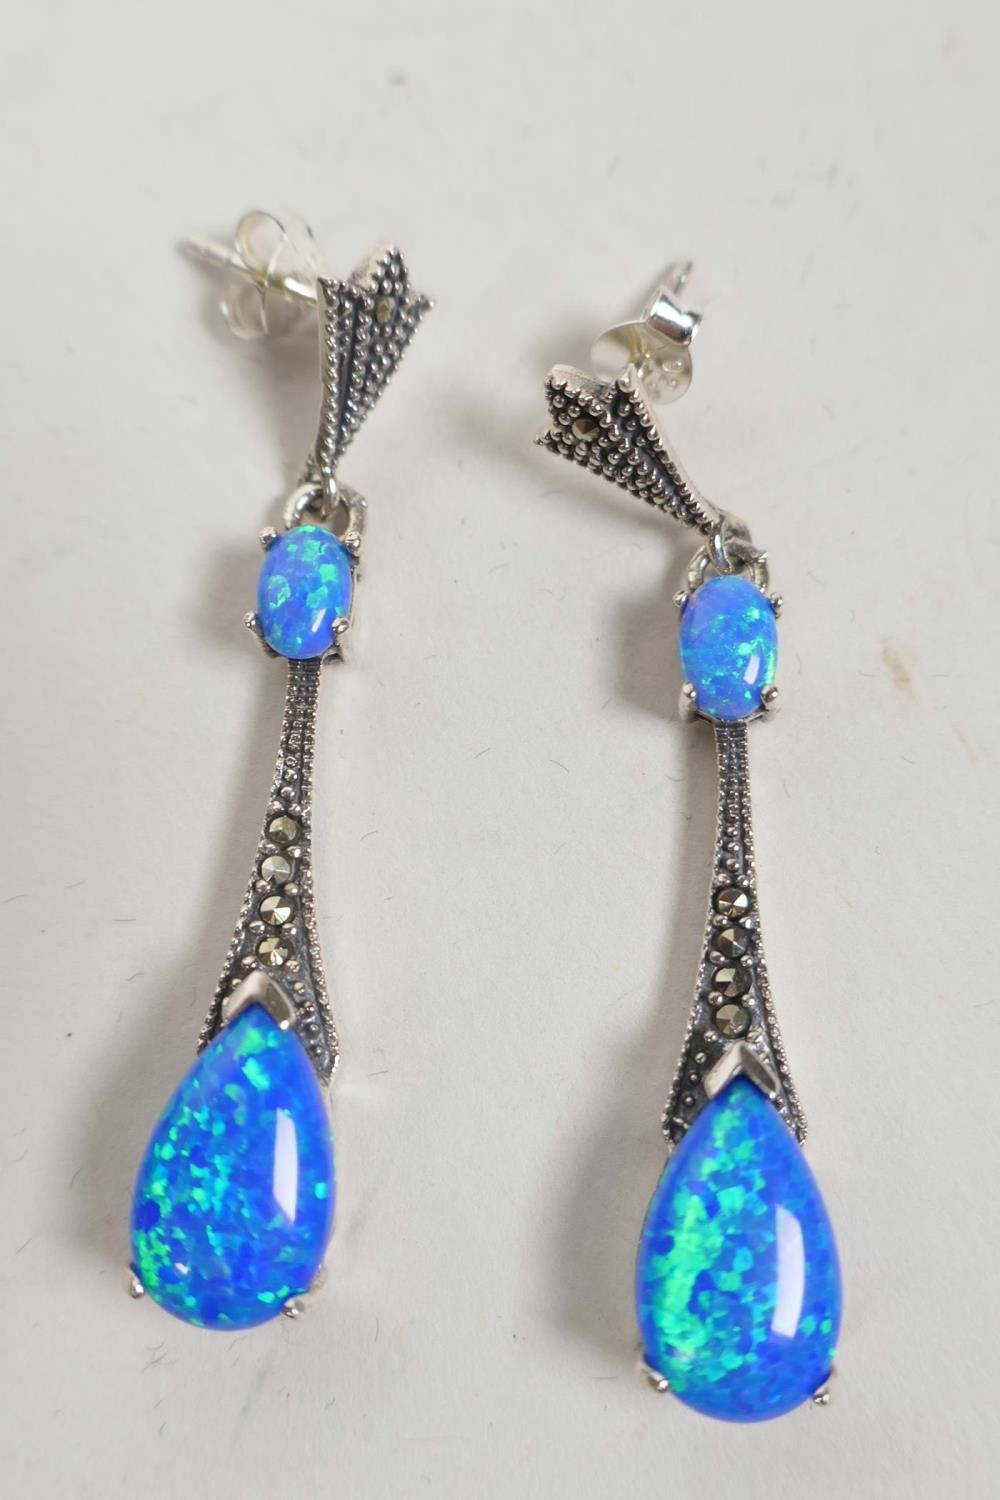 Silver 925 Art Deco Earings with Blue Opalite & Marcasite